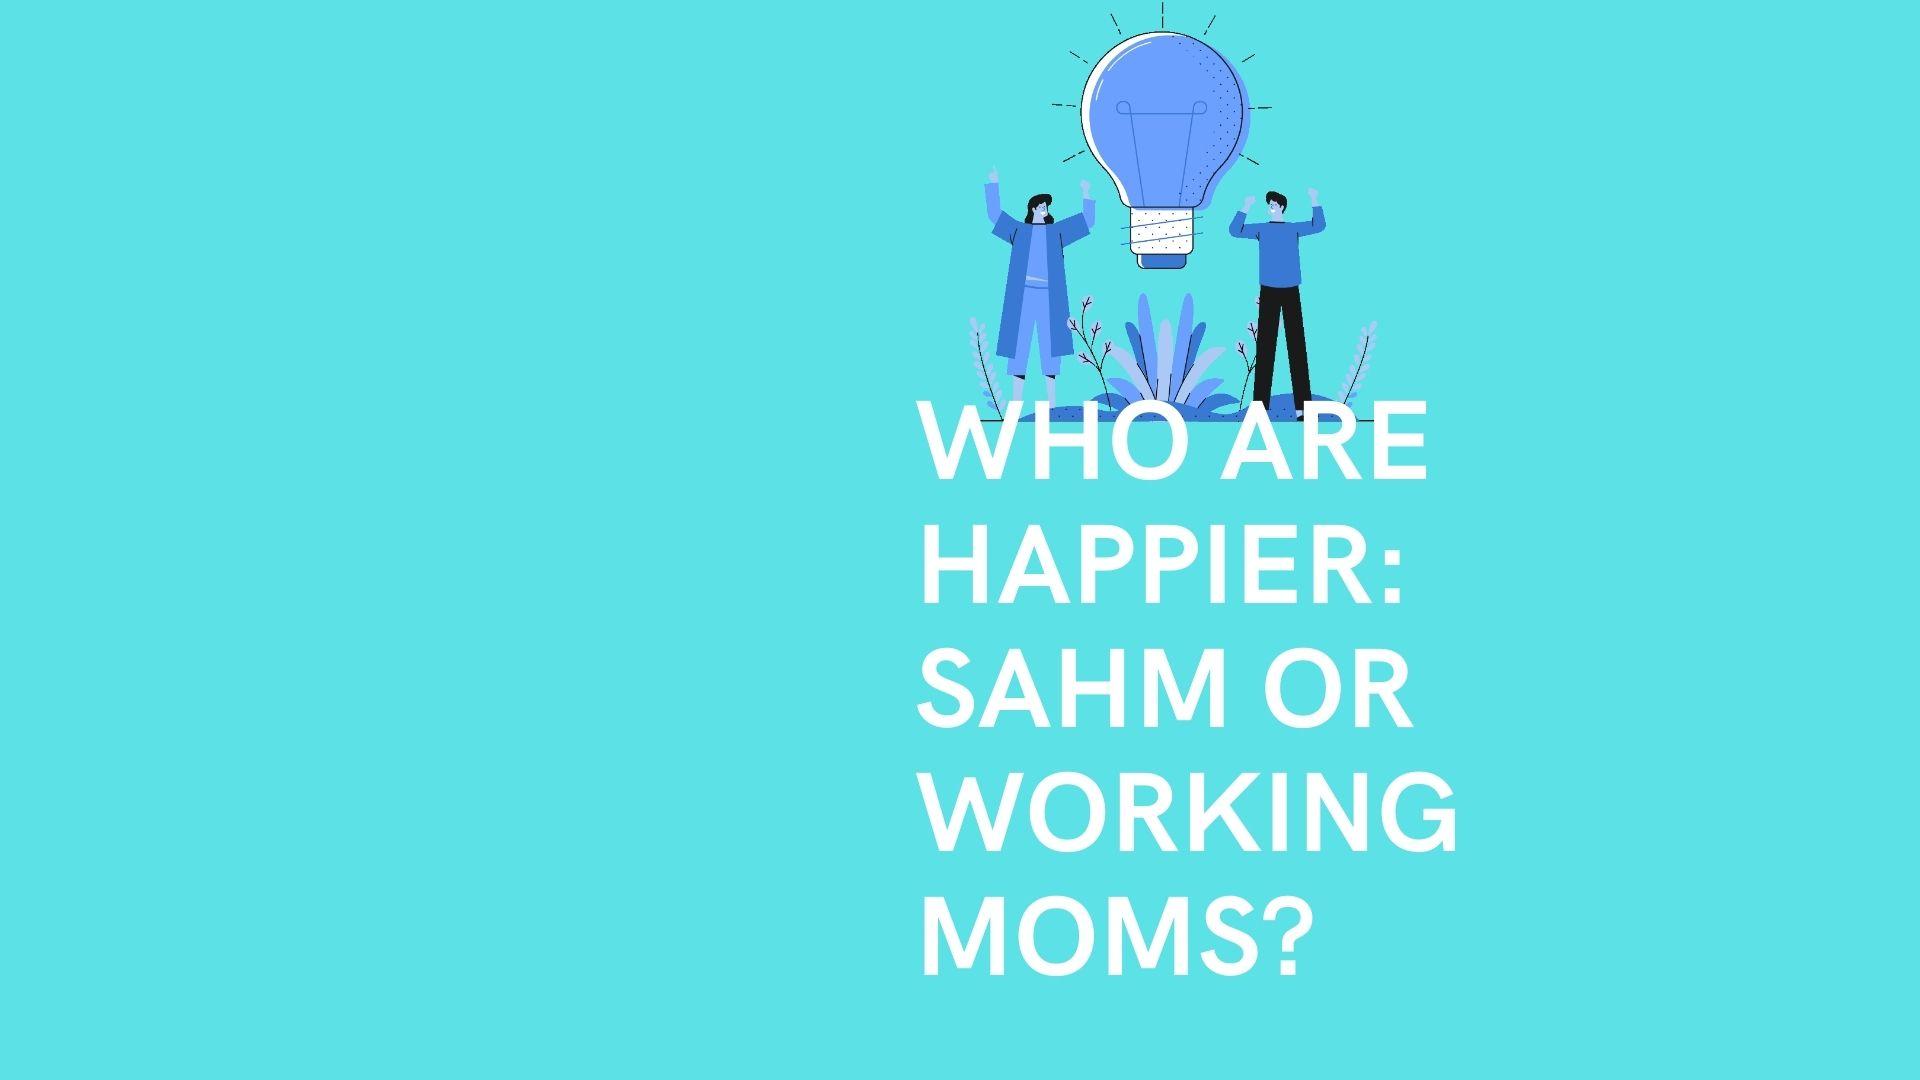 Revealed: Stay at Home Moms are not Happier than Working Moms